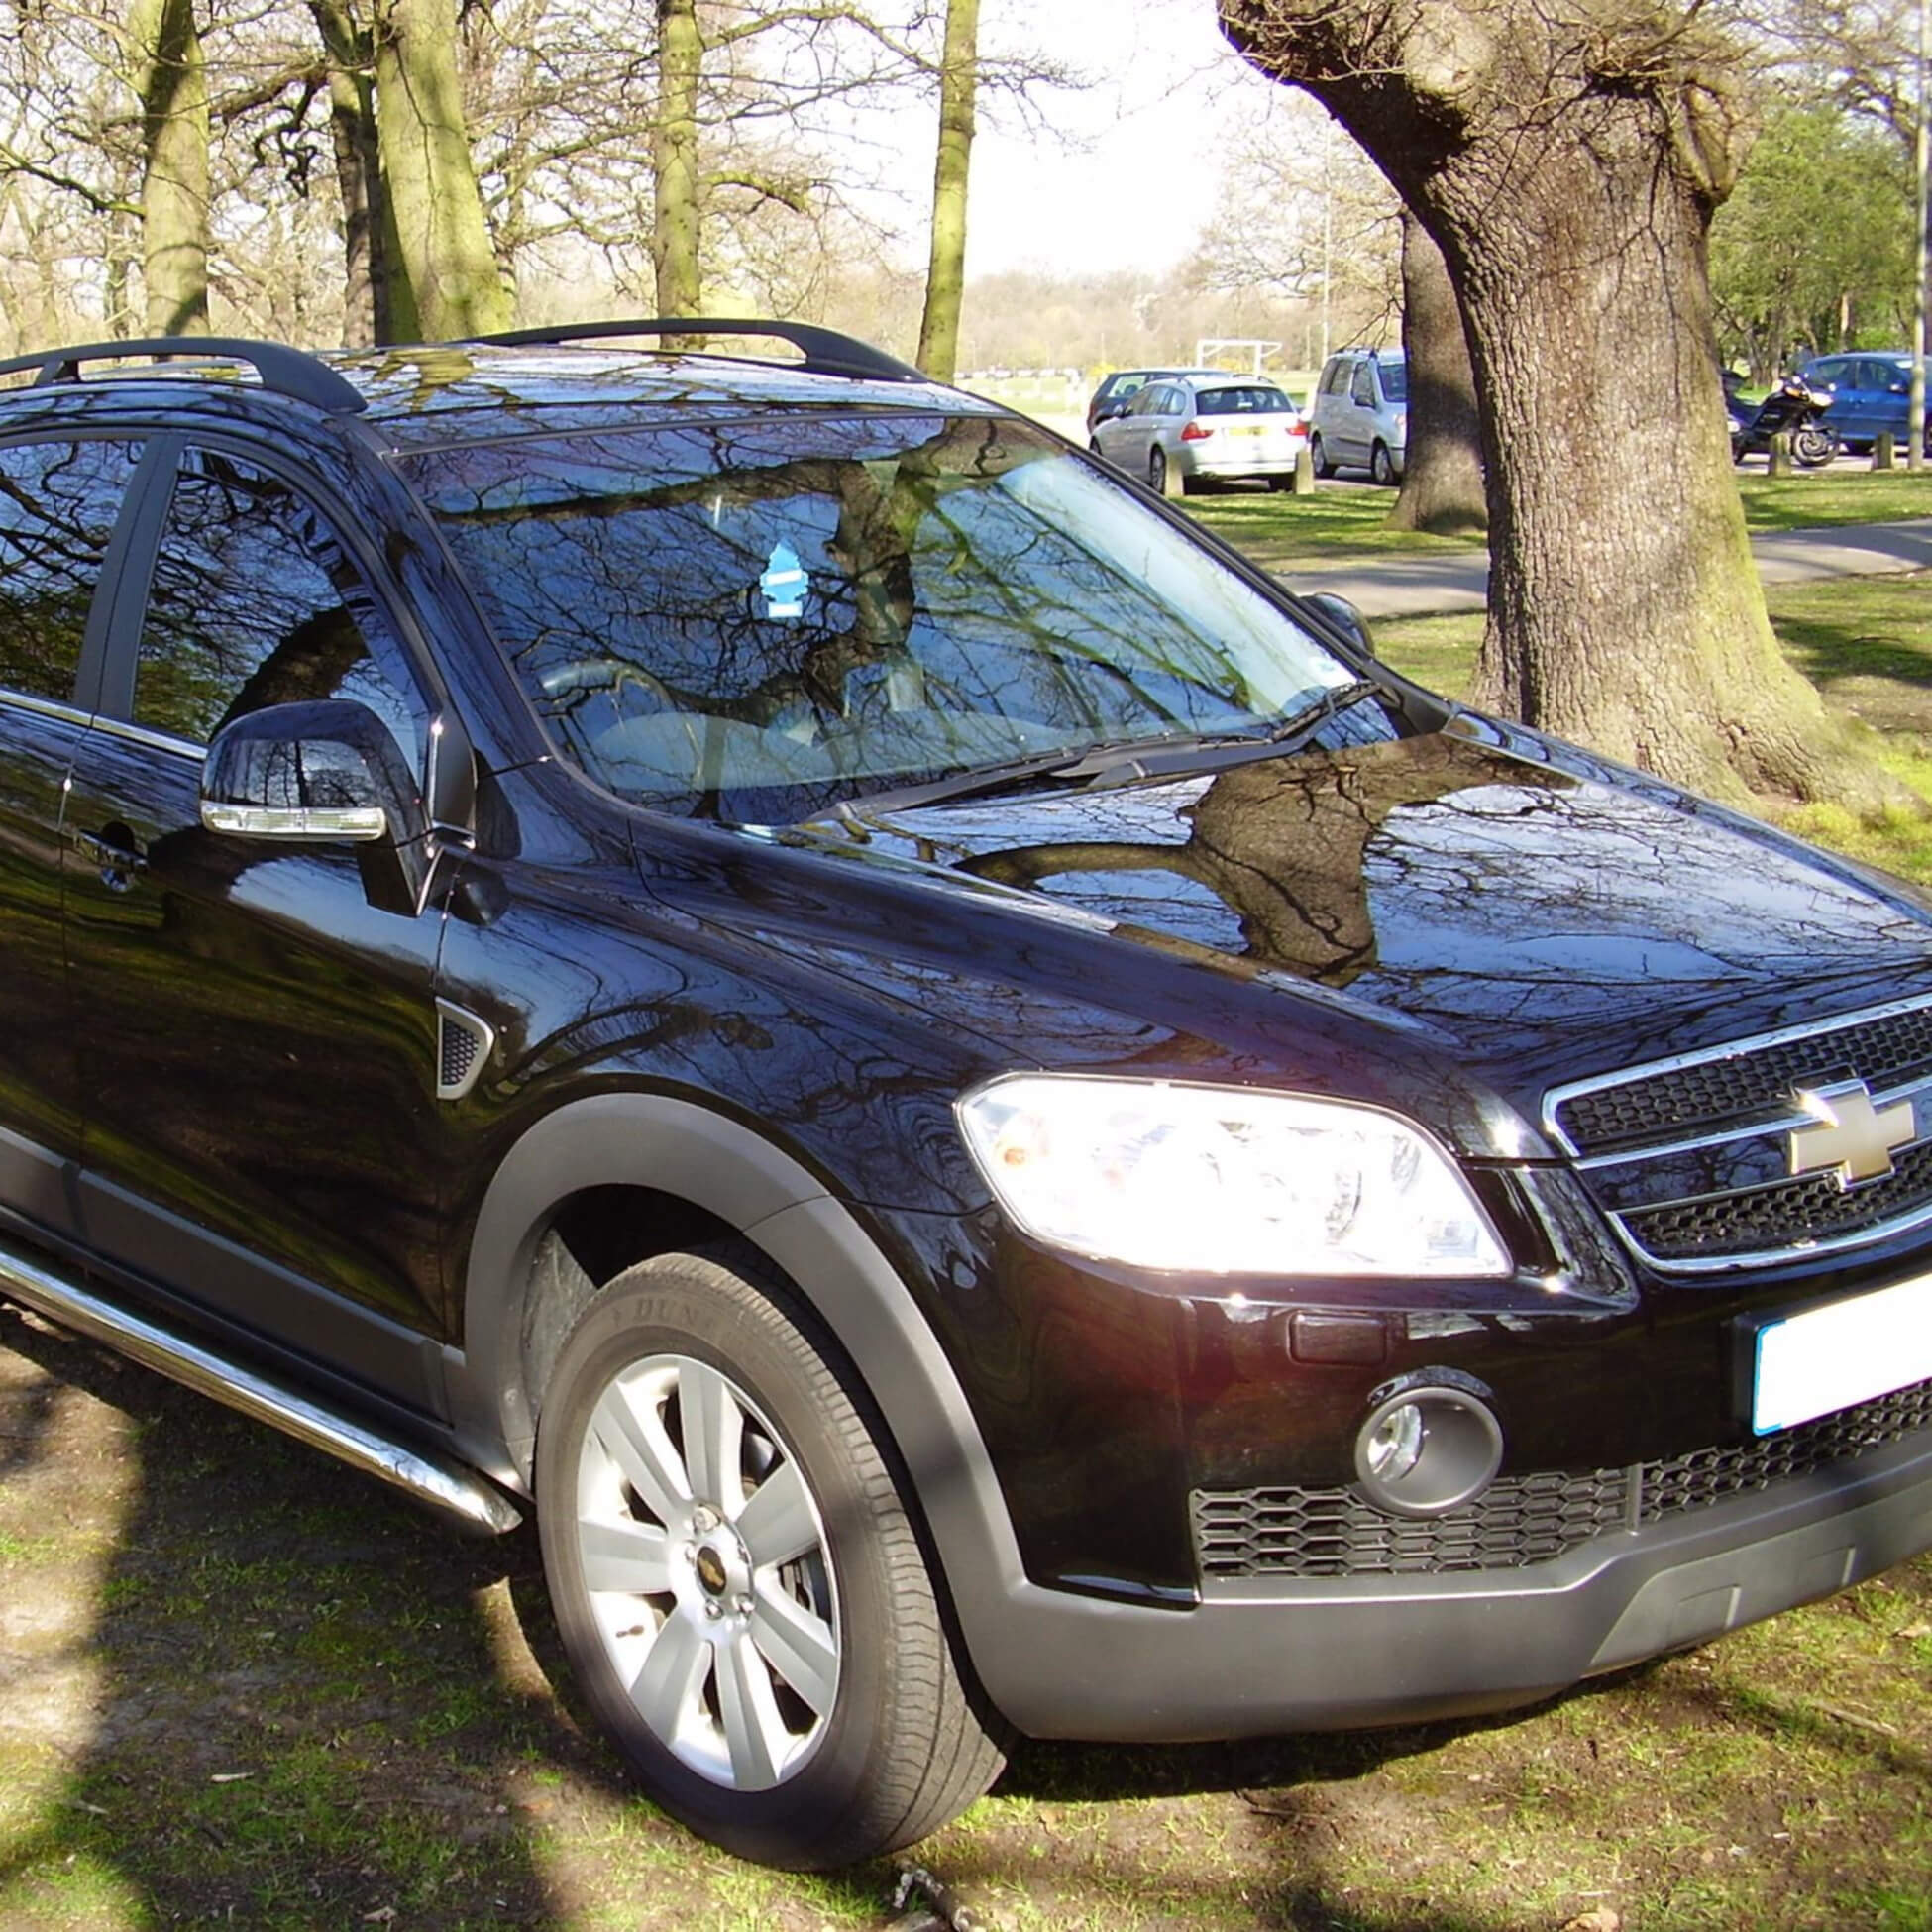 Direct4x4 accessories for Chevrolet Captiva vehicles with a photo of a black Chevrolet Captiva parked in front of trees in the sunlight